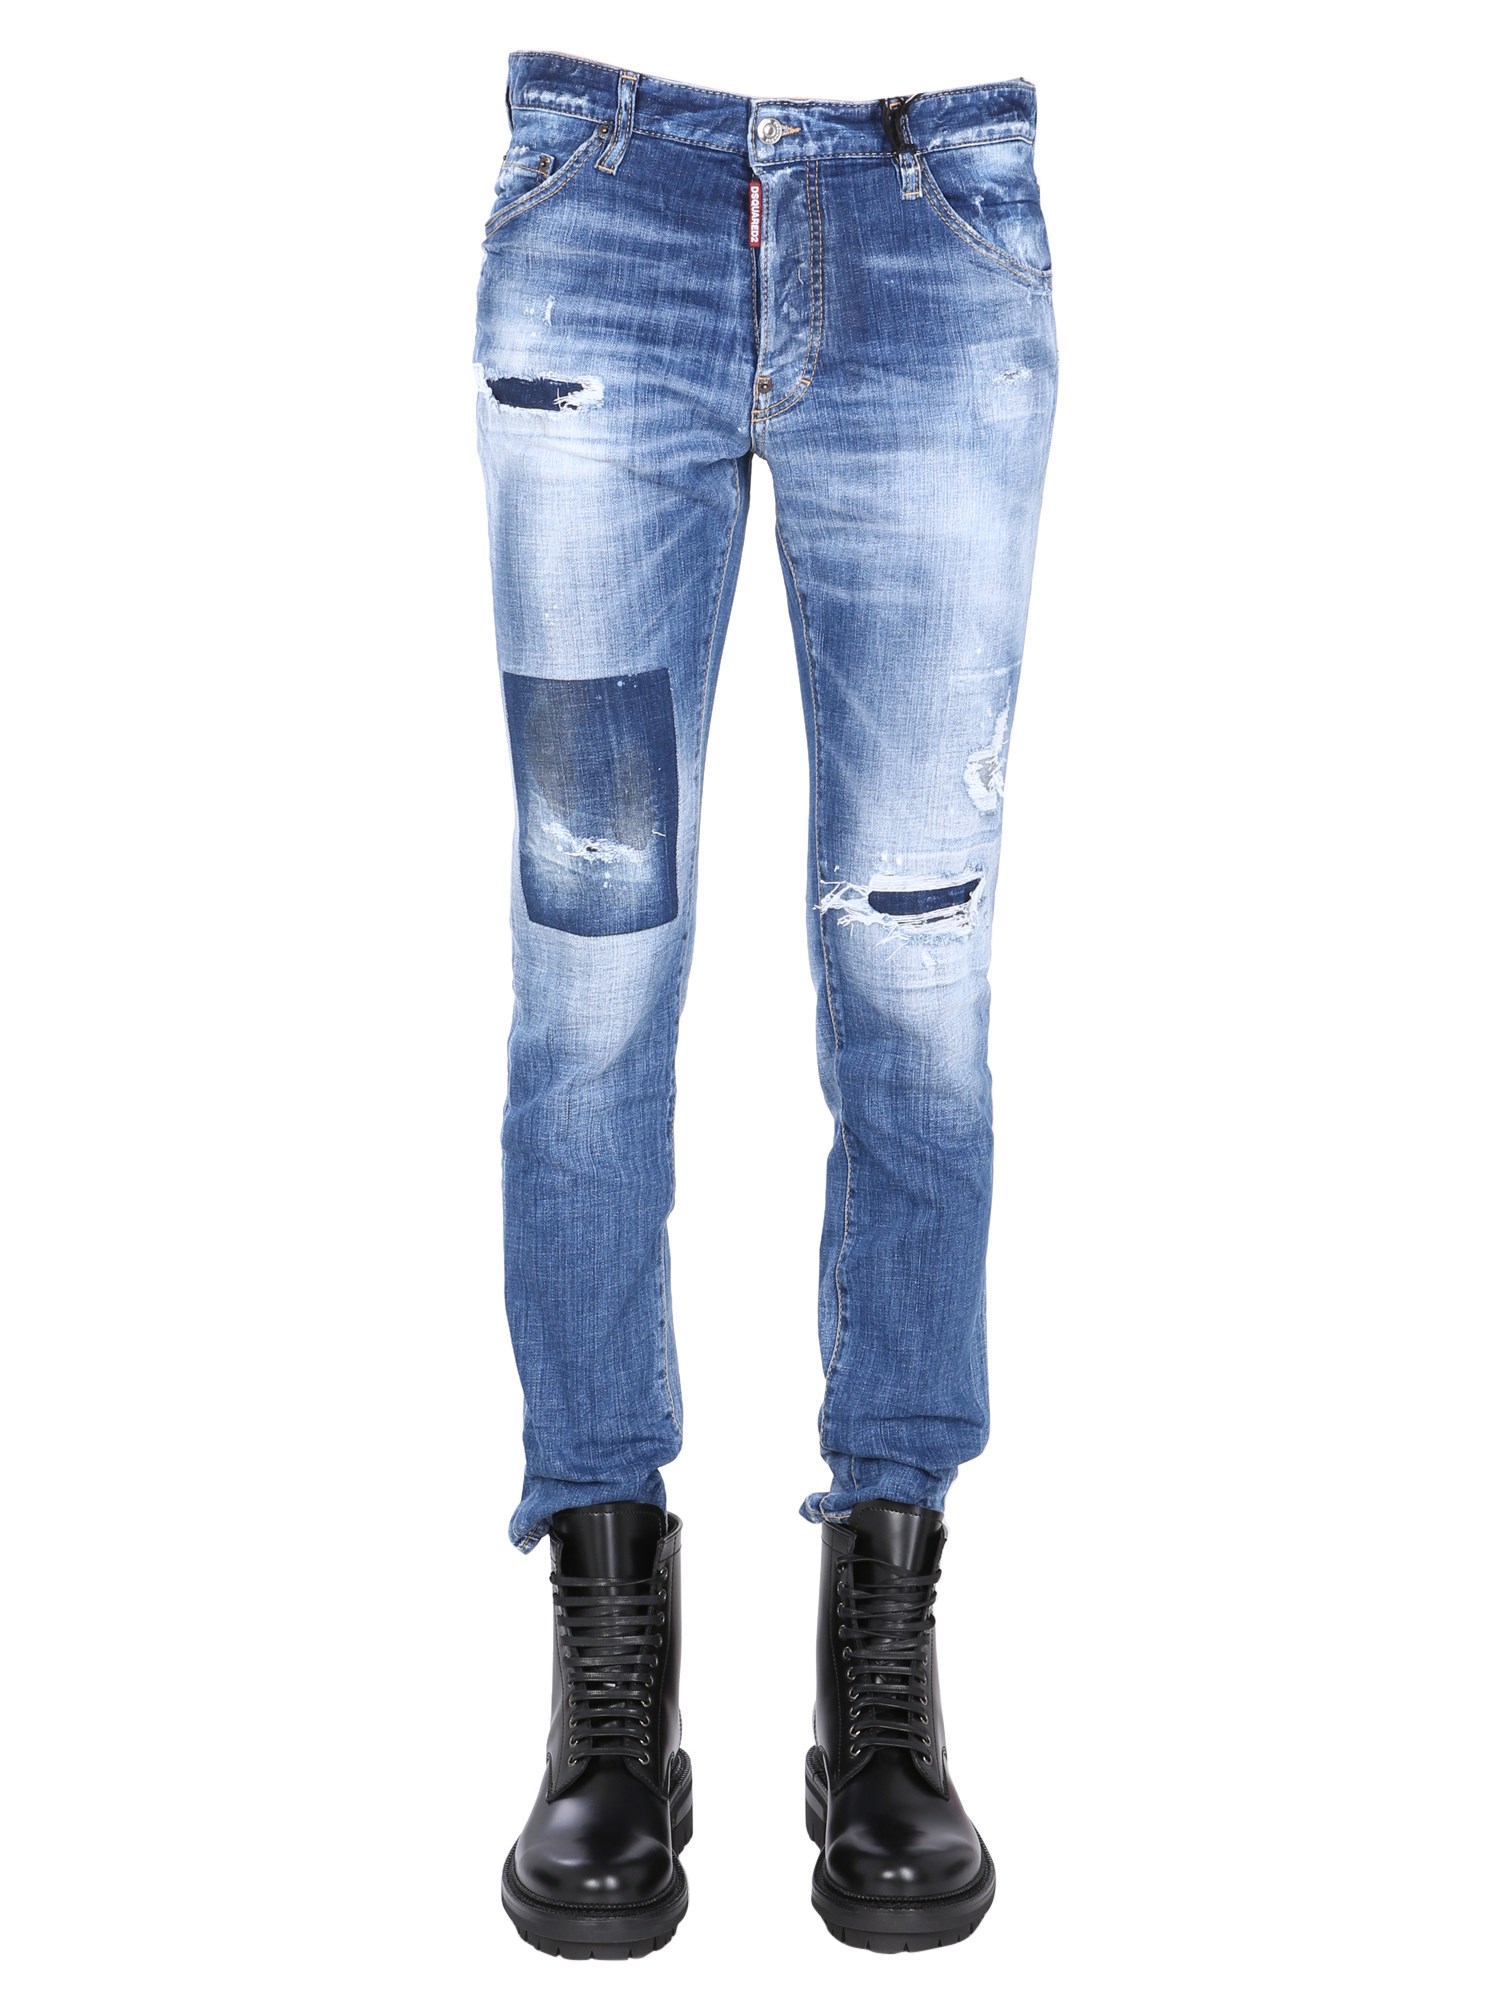 dsquared "cool guy" jeans